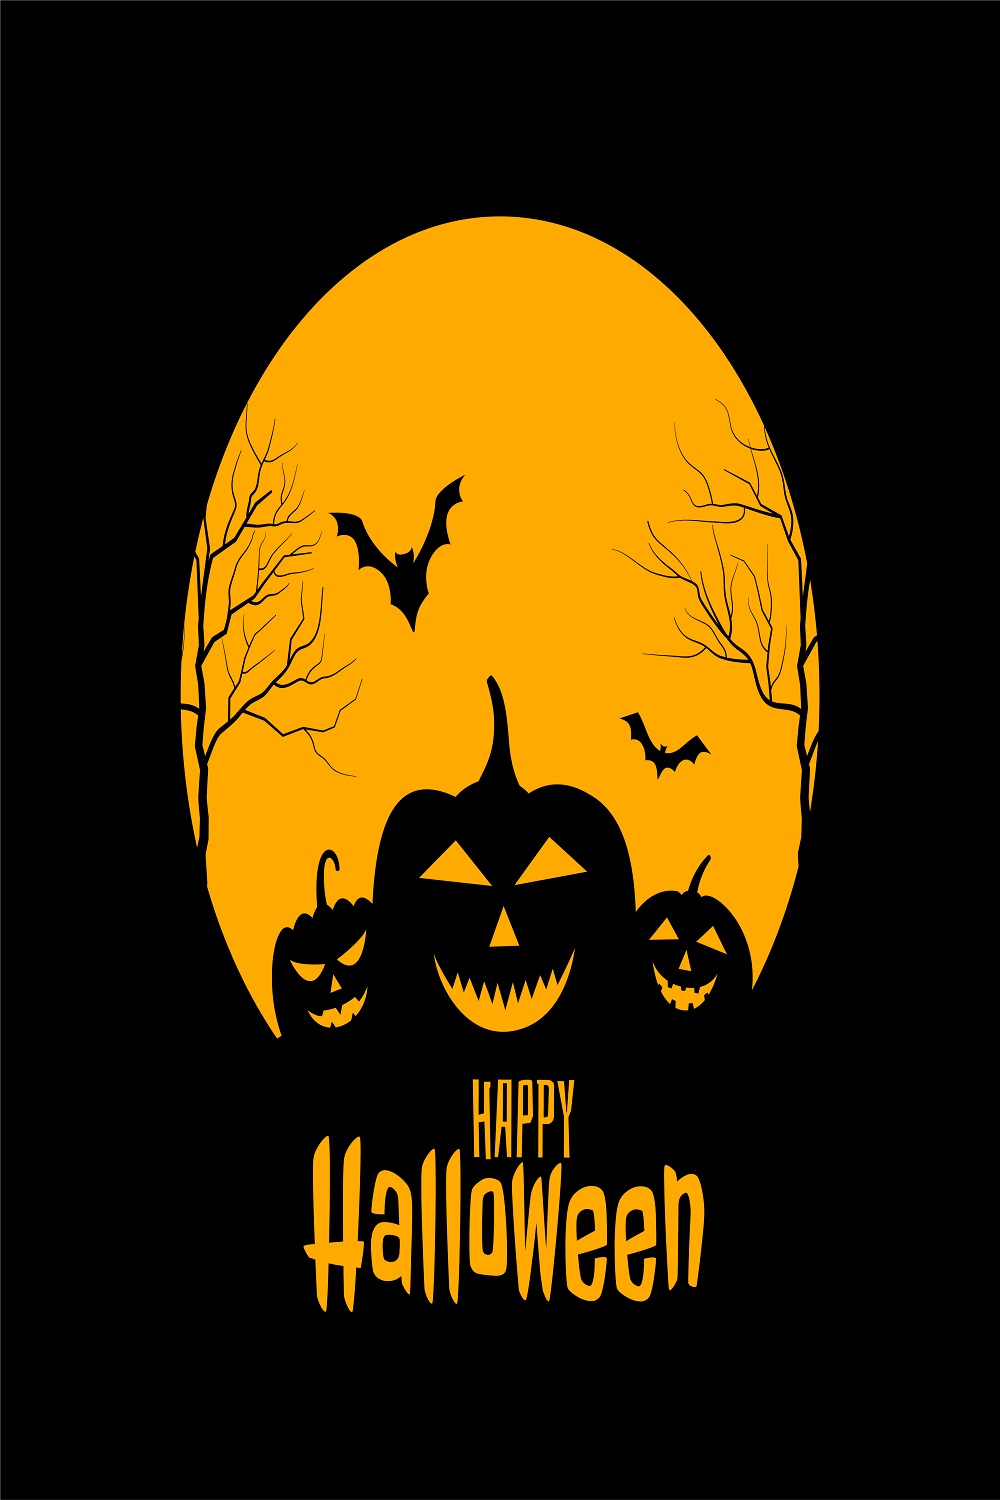 Happy Halloween scary black yellow design pinterest preview image.